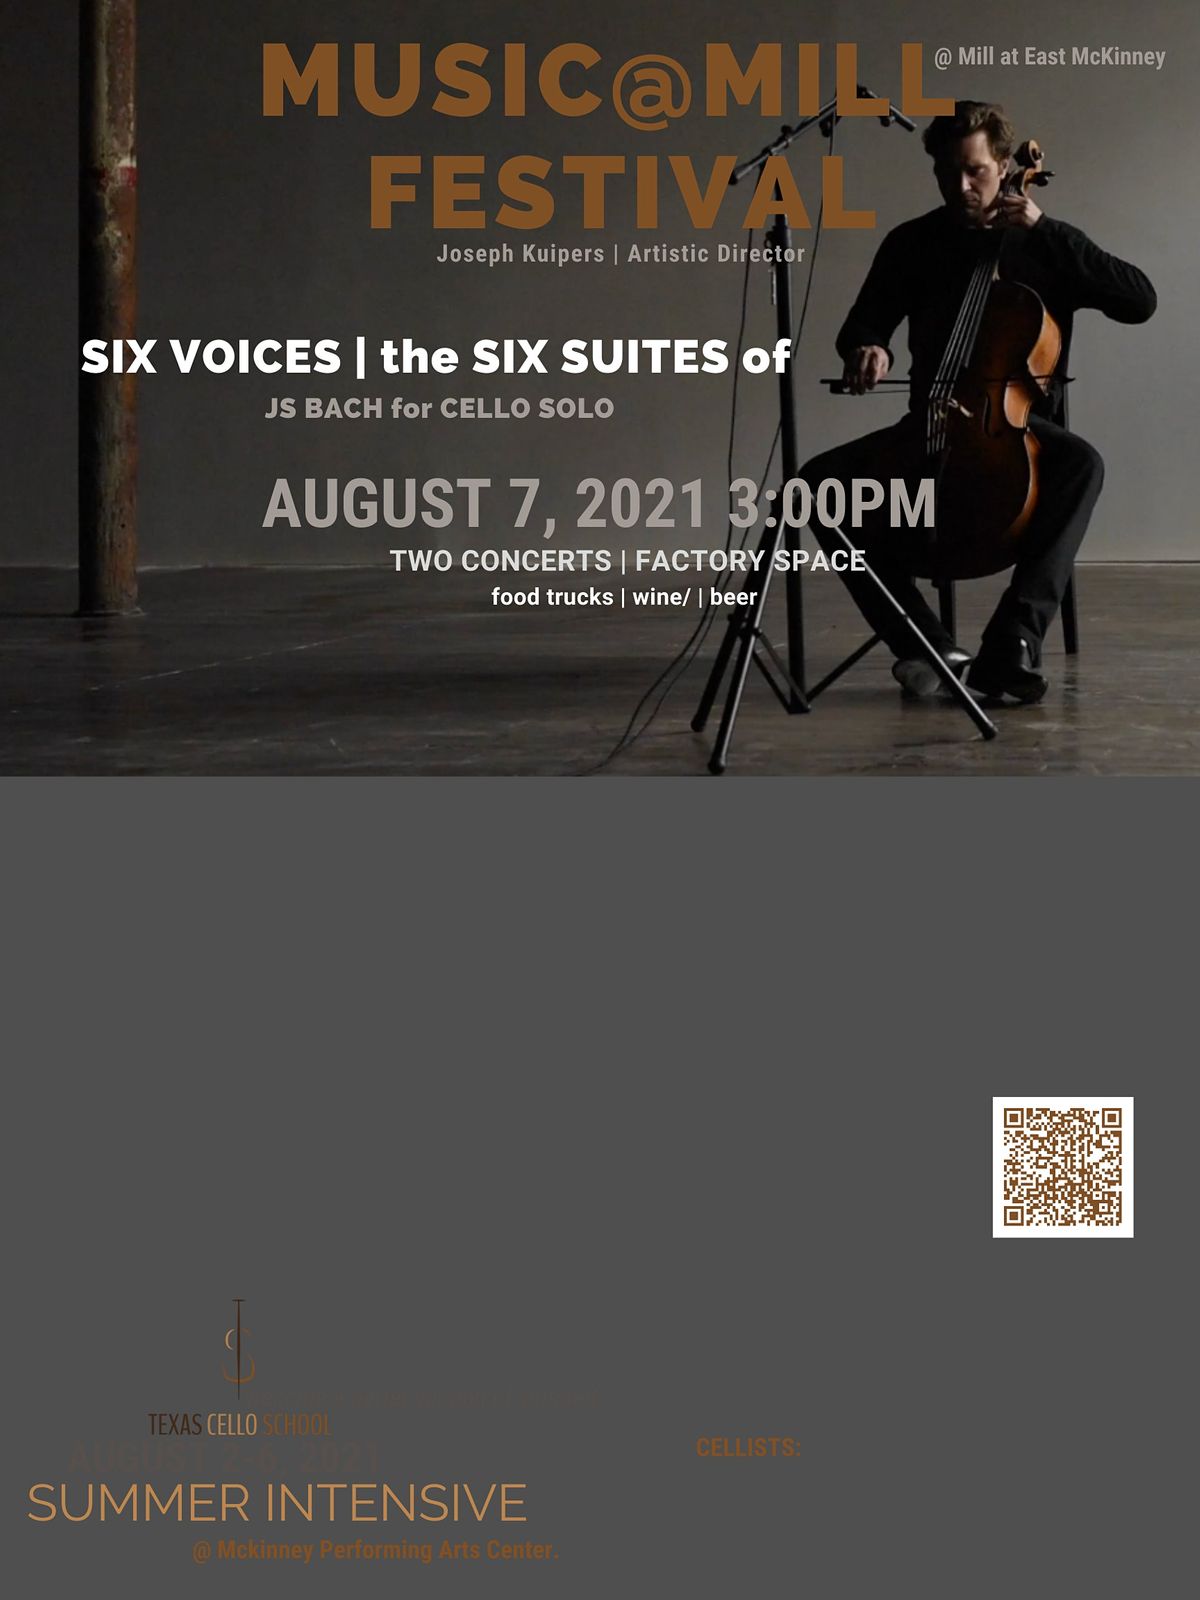 Music@Mill Festival:  SIX VOICES | the SIX SUITES of JS BACH for CELLO SOLO